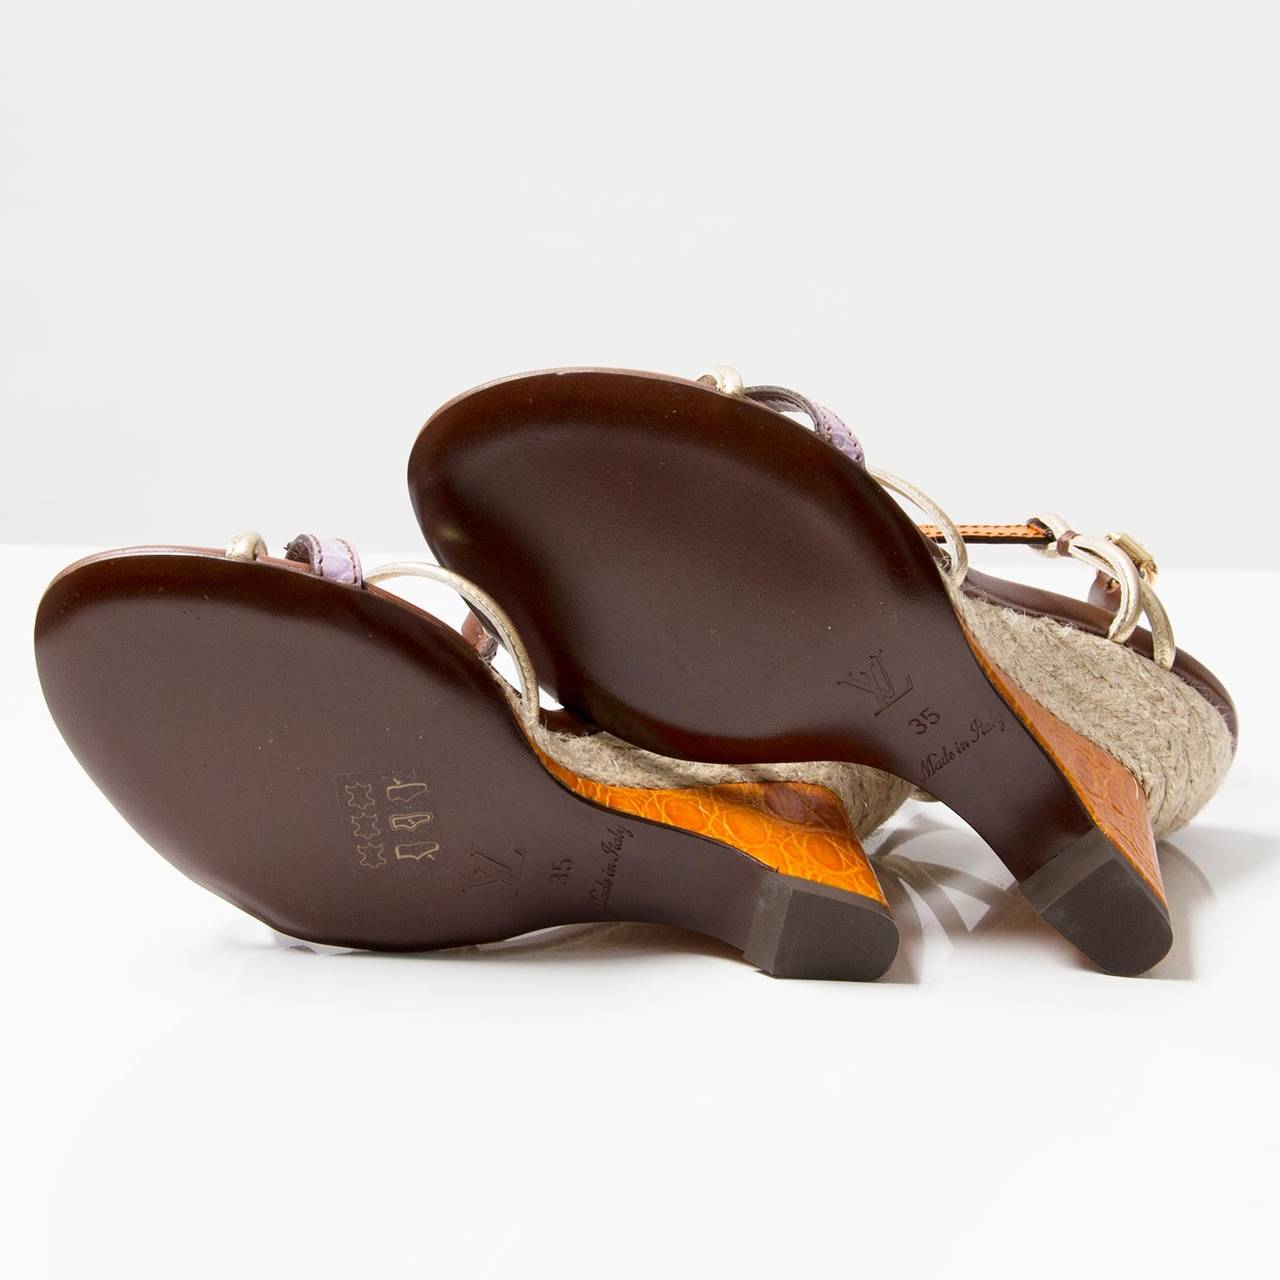 Louis Vuitton purple and orange leather Louis Vuitton wedge sandals with gold-tone and side buckle closure.